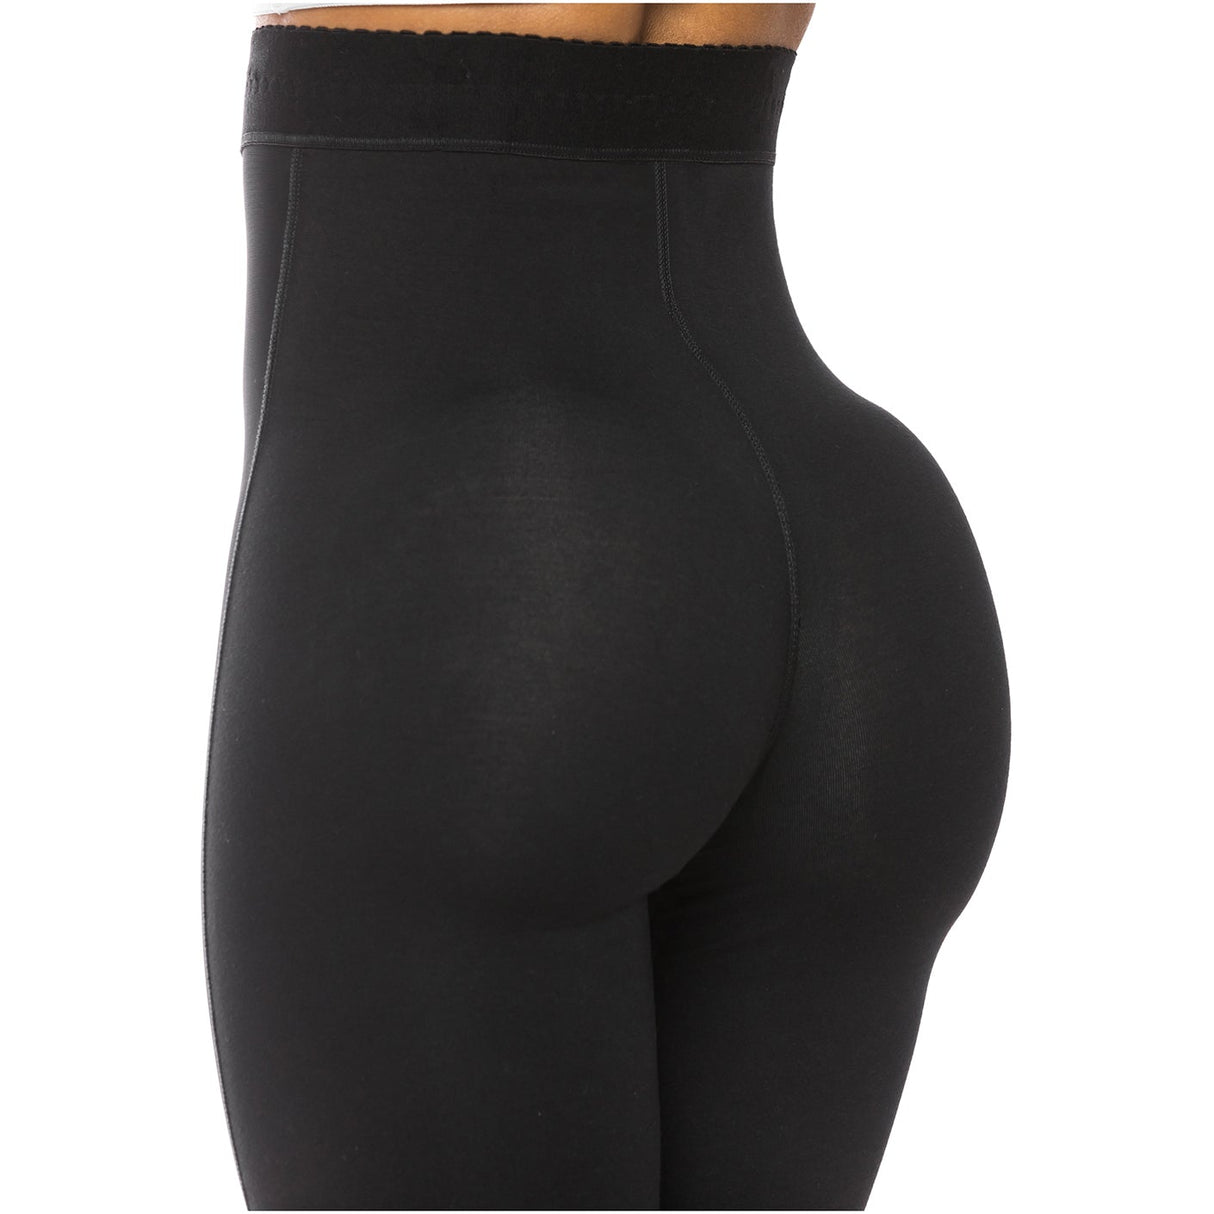 The Best Fajas Colombianas Fresh and Light-Body Girdle for Women Women  Shapewear LEGGINGS Capri style Tammy, Waist, and Thigs Slimmer Fajas  reductoras y moldeadoras Colombianas Black at  Women's Clothing store